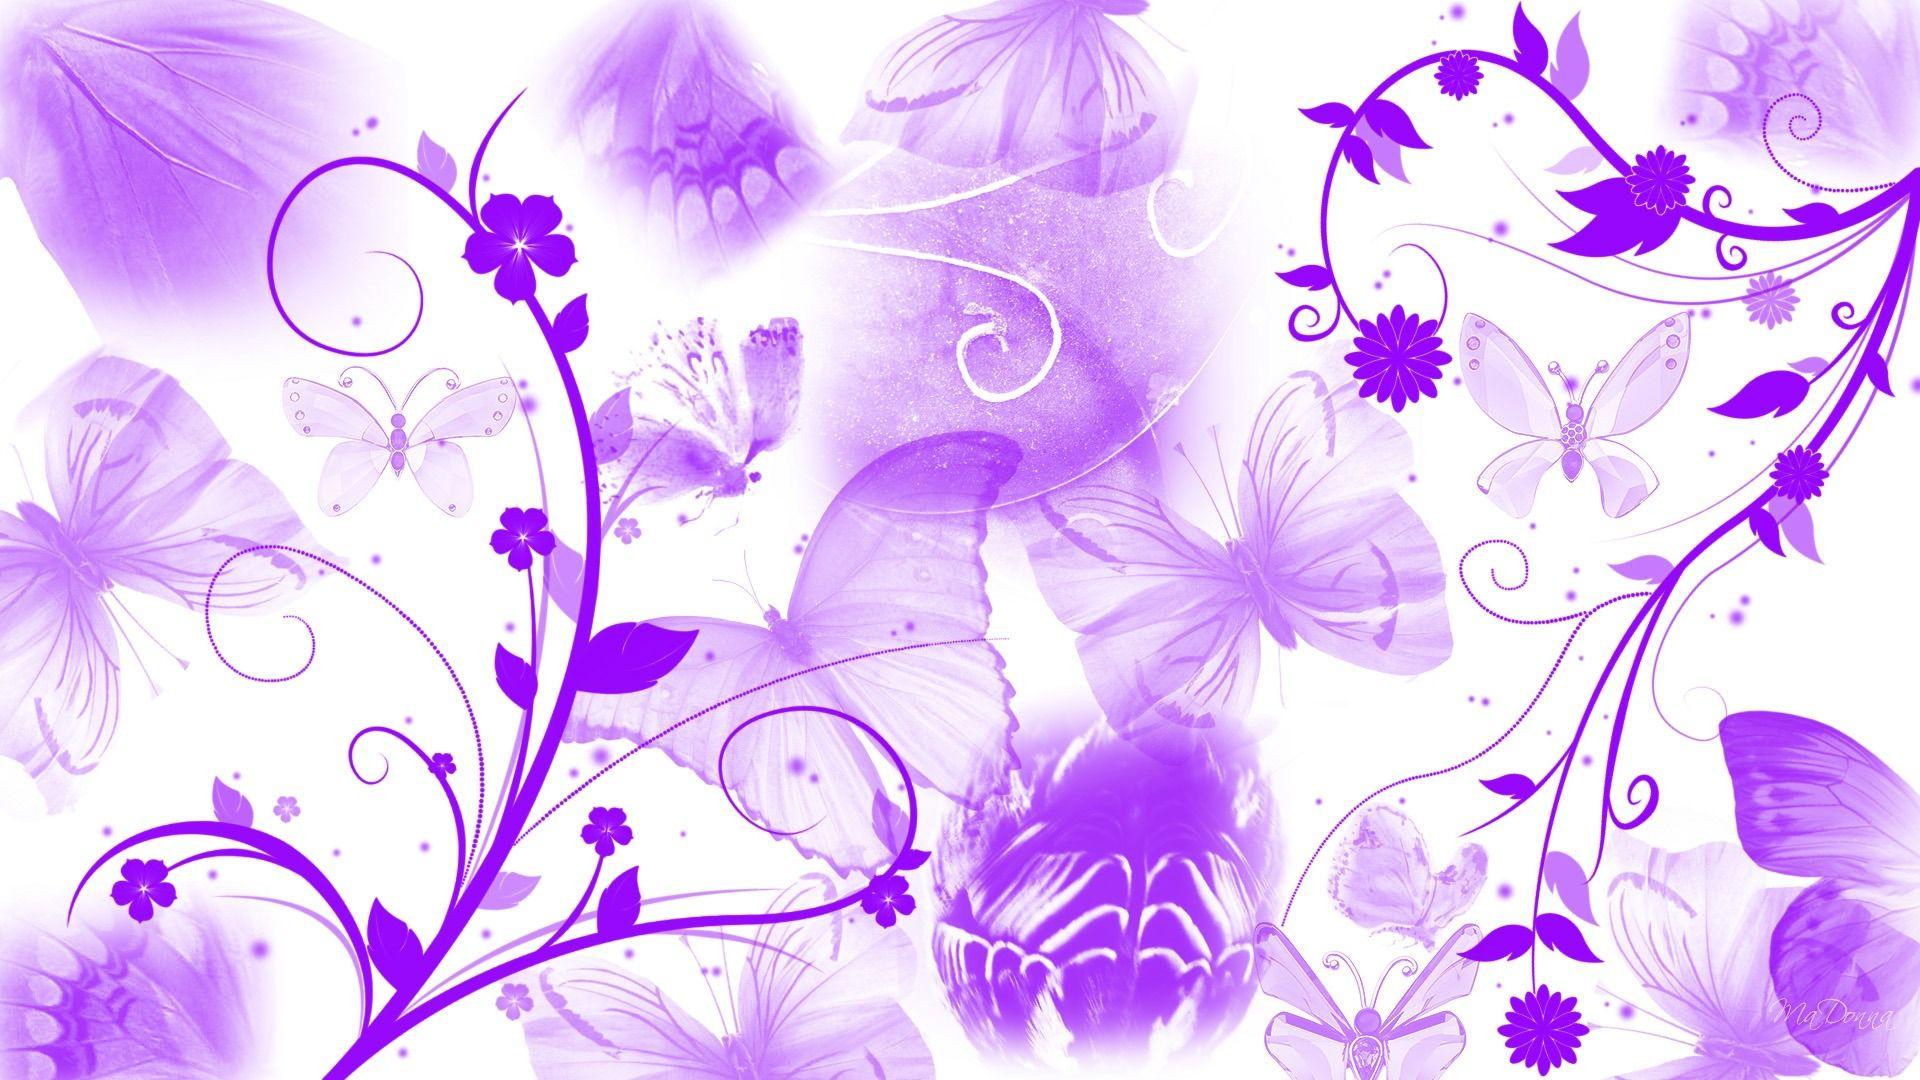 Wallpaper.wiki Butterfly Wallpaper For Walls PIC WPC008144